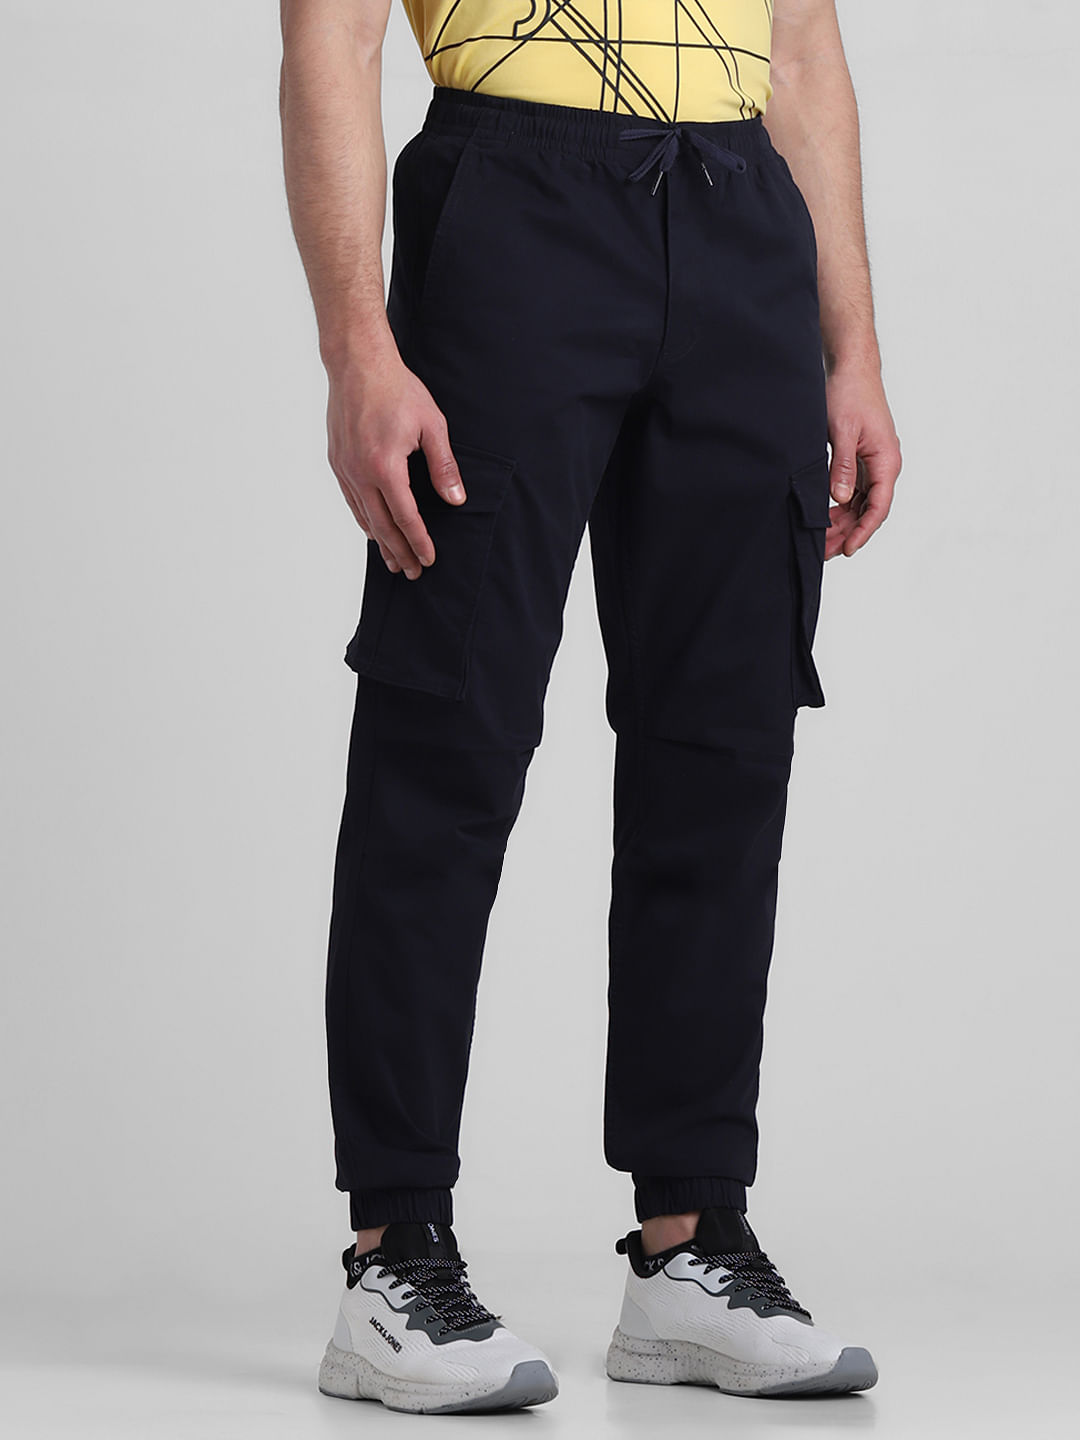 J.Sette Men's cargo pants with cuffs: for sale at 29.99€ on Mecshopping.it